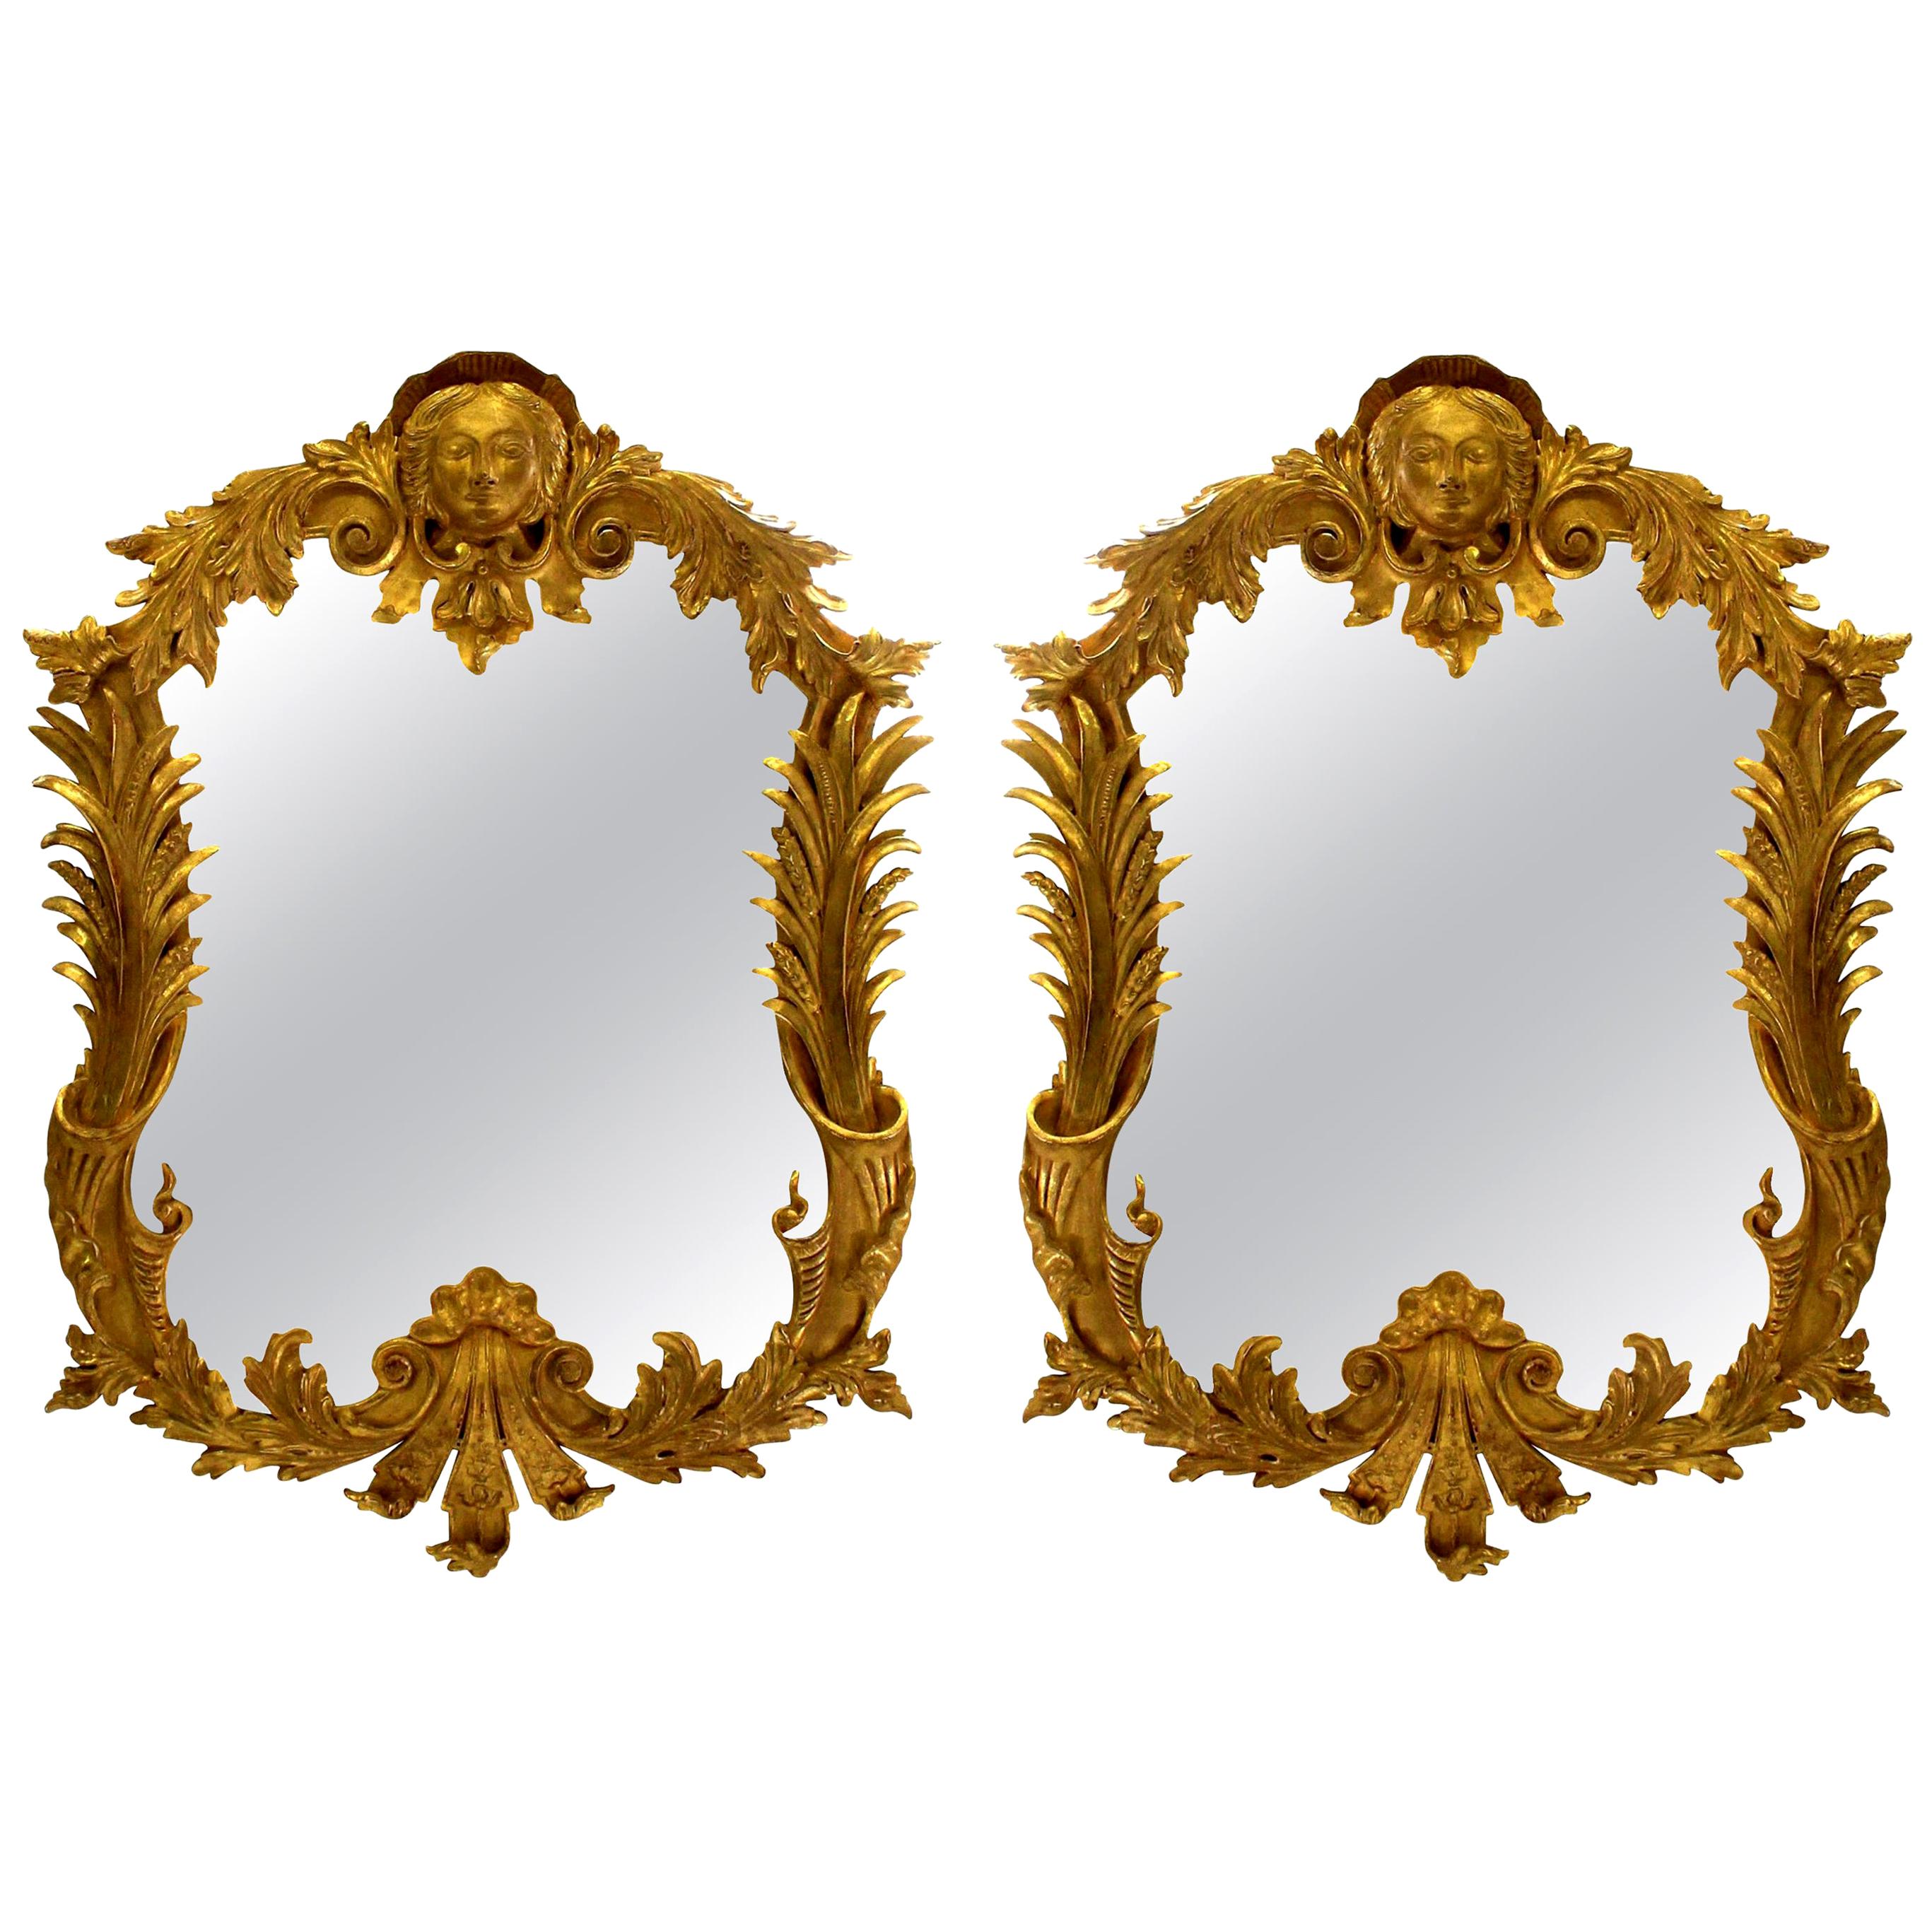 Pair of Large English George III Style Carved Giltwood Mirrors